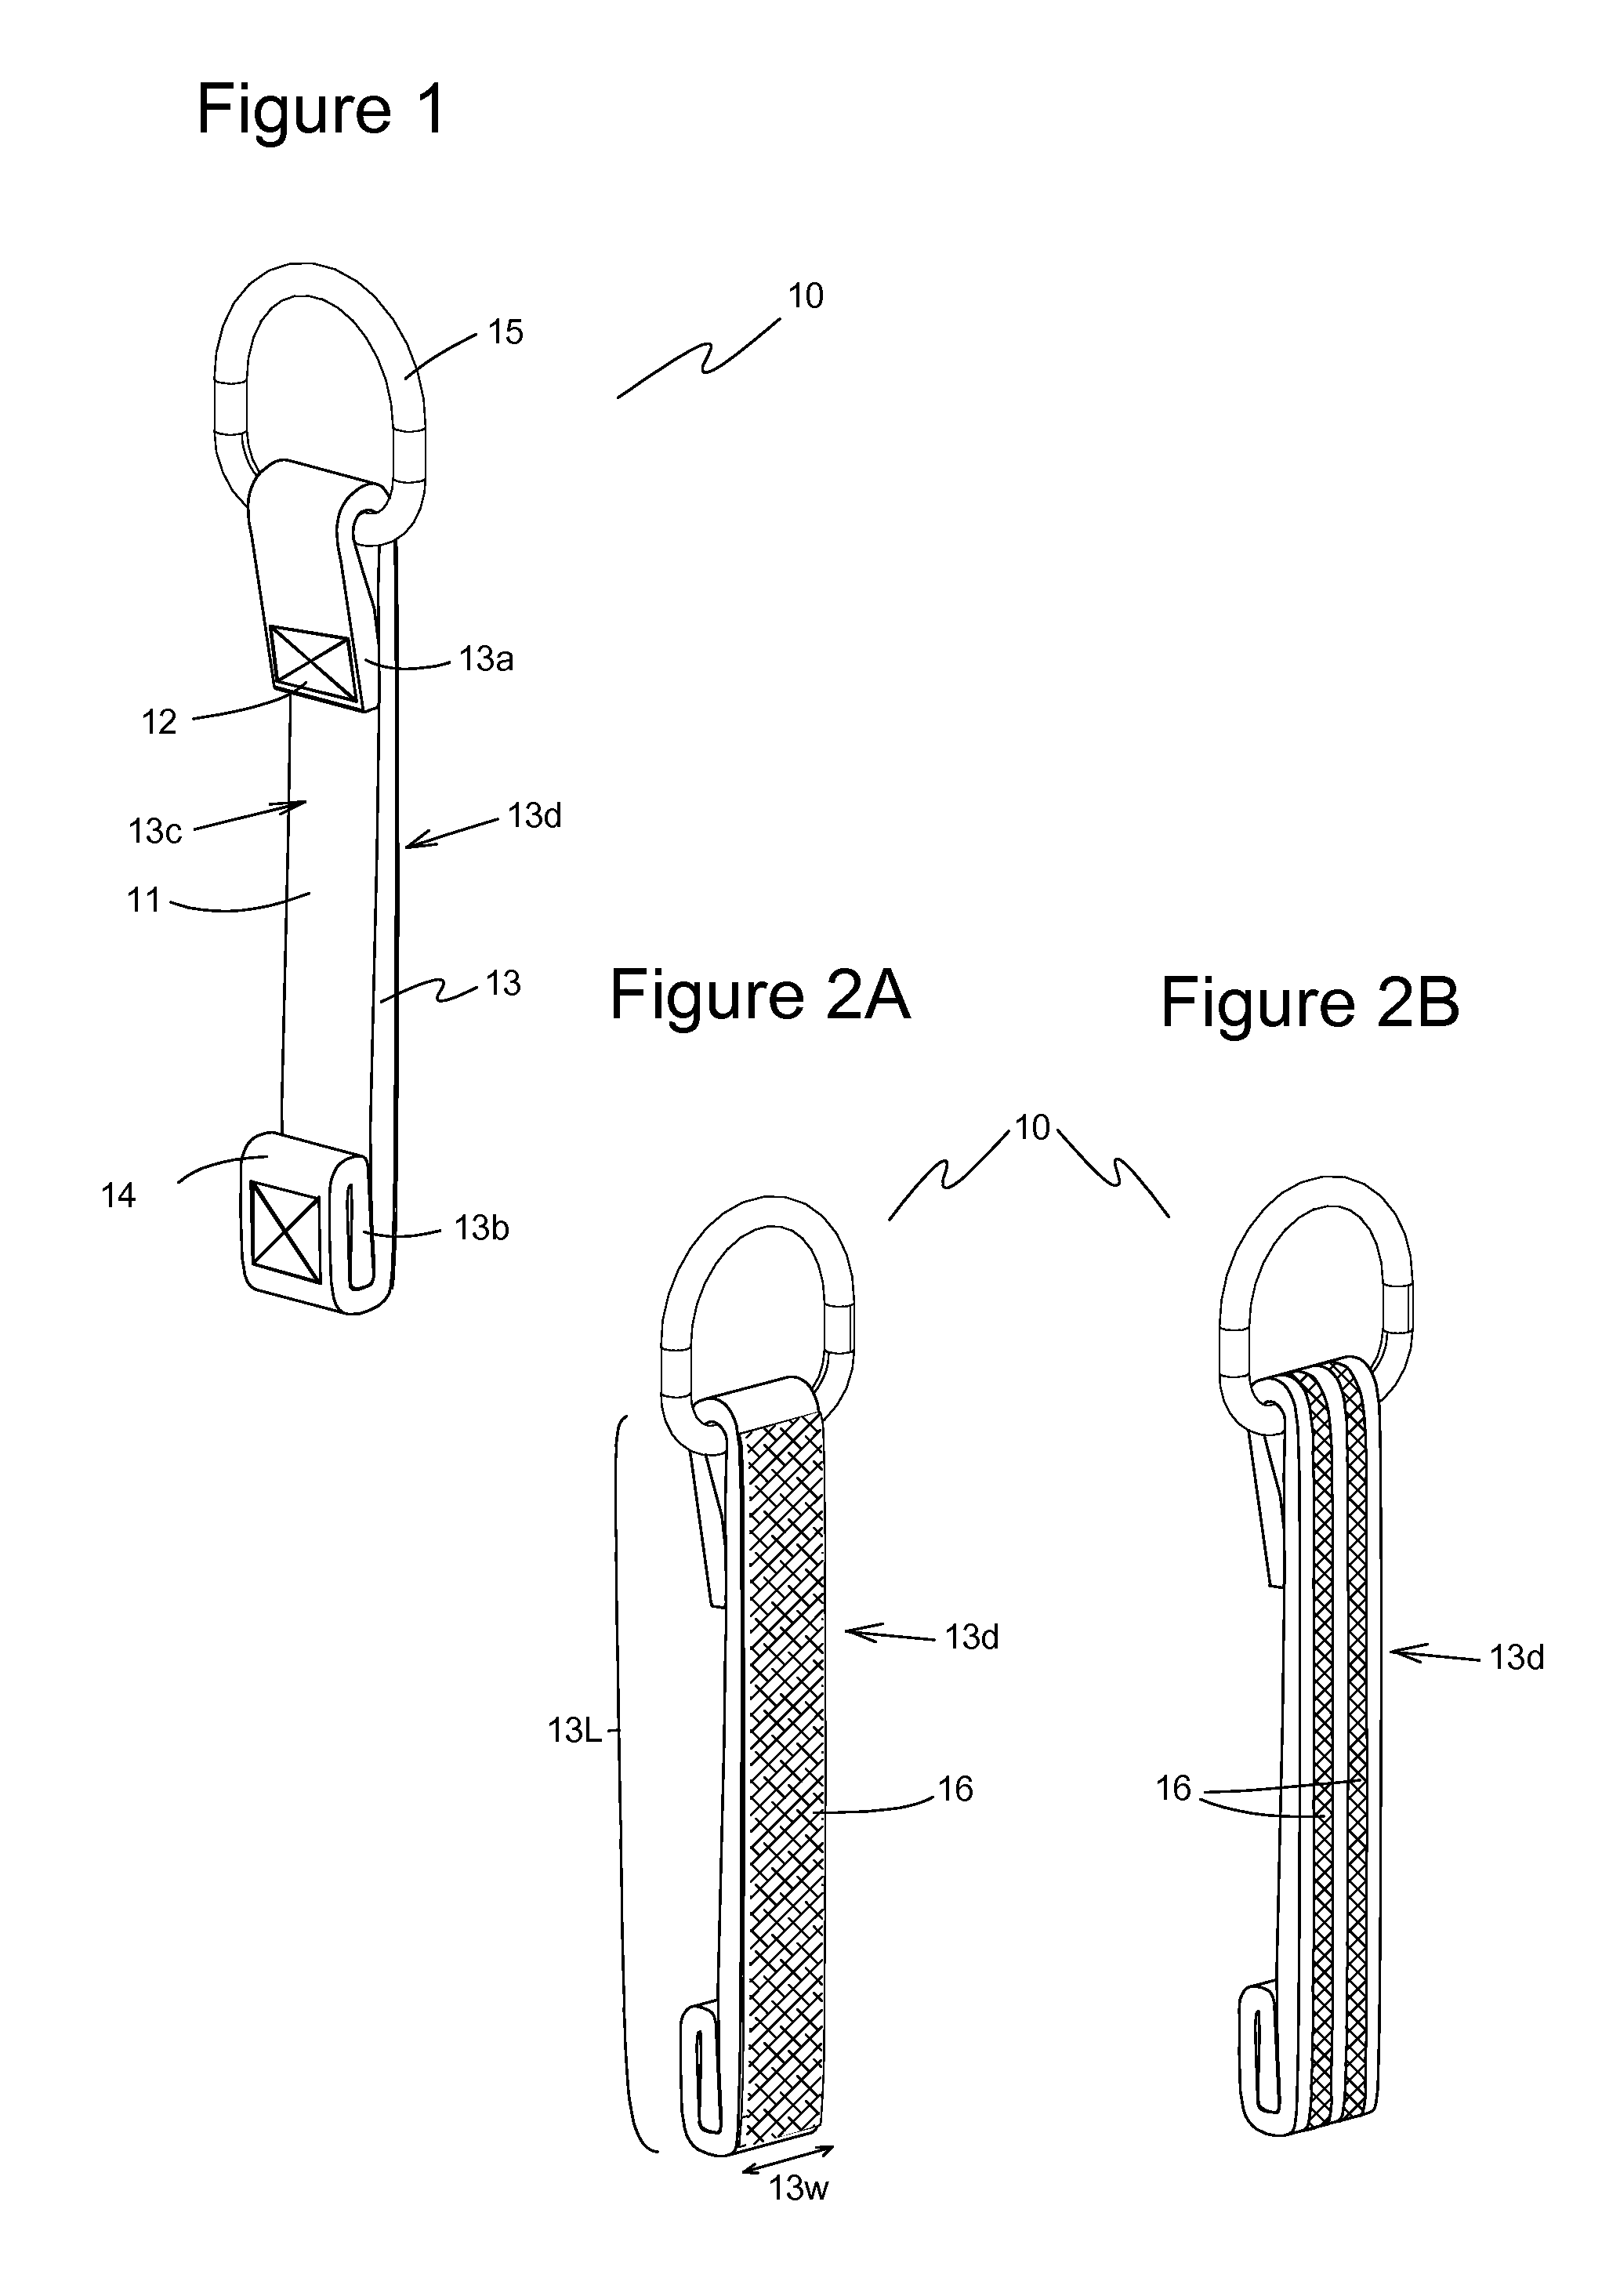 Method of tethering a tool